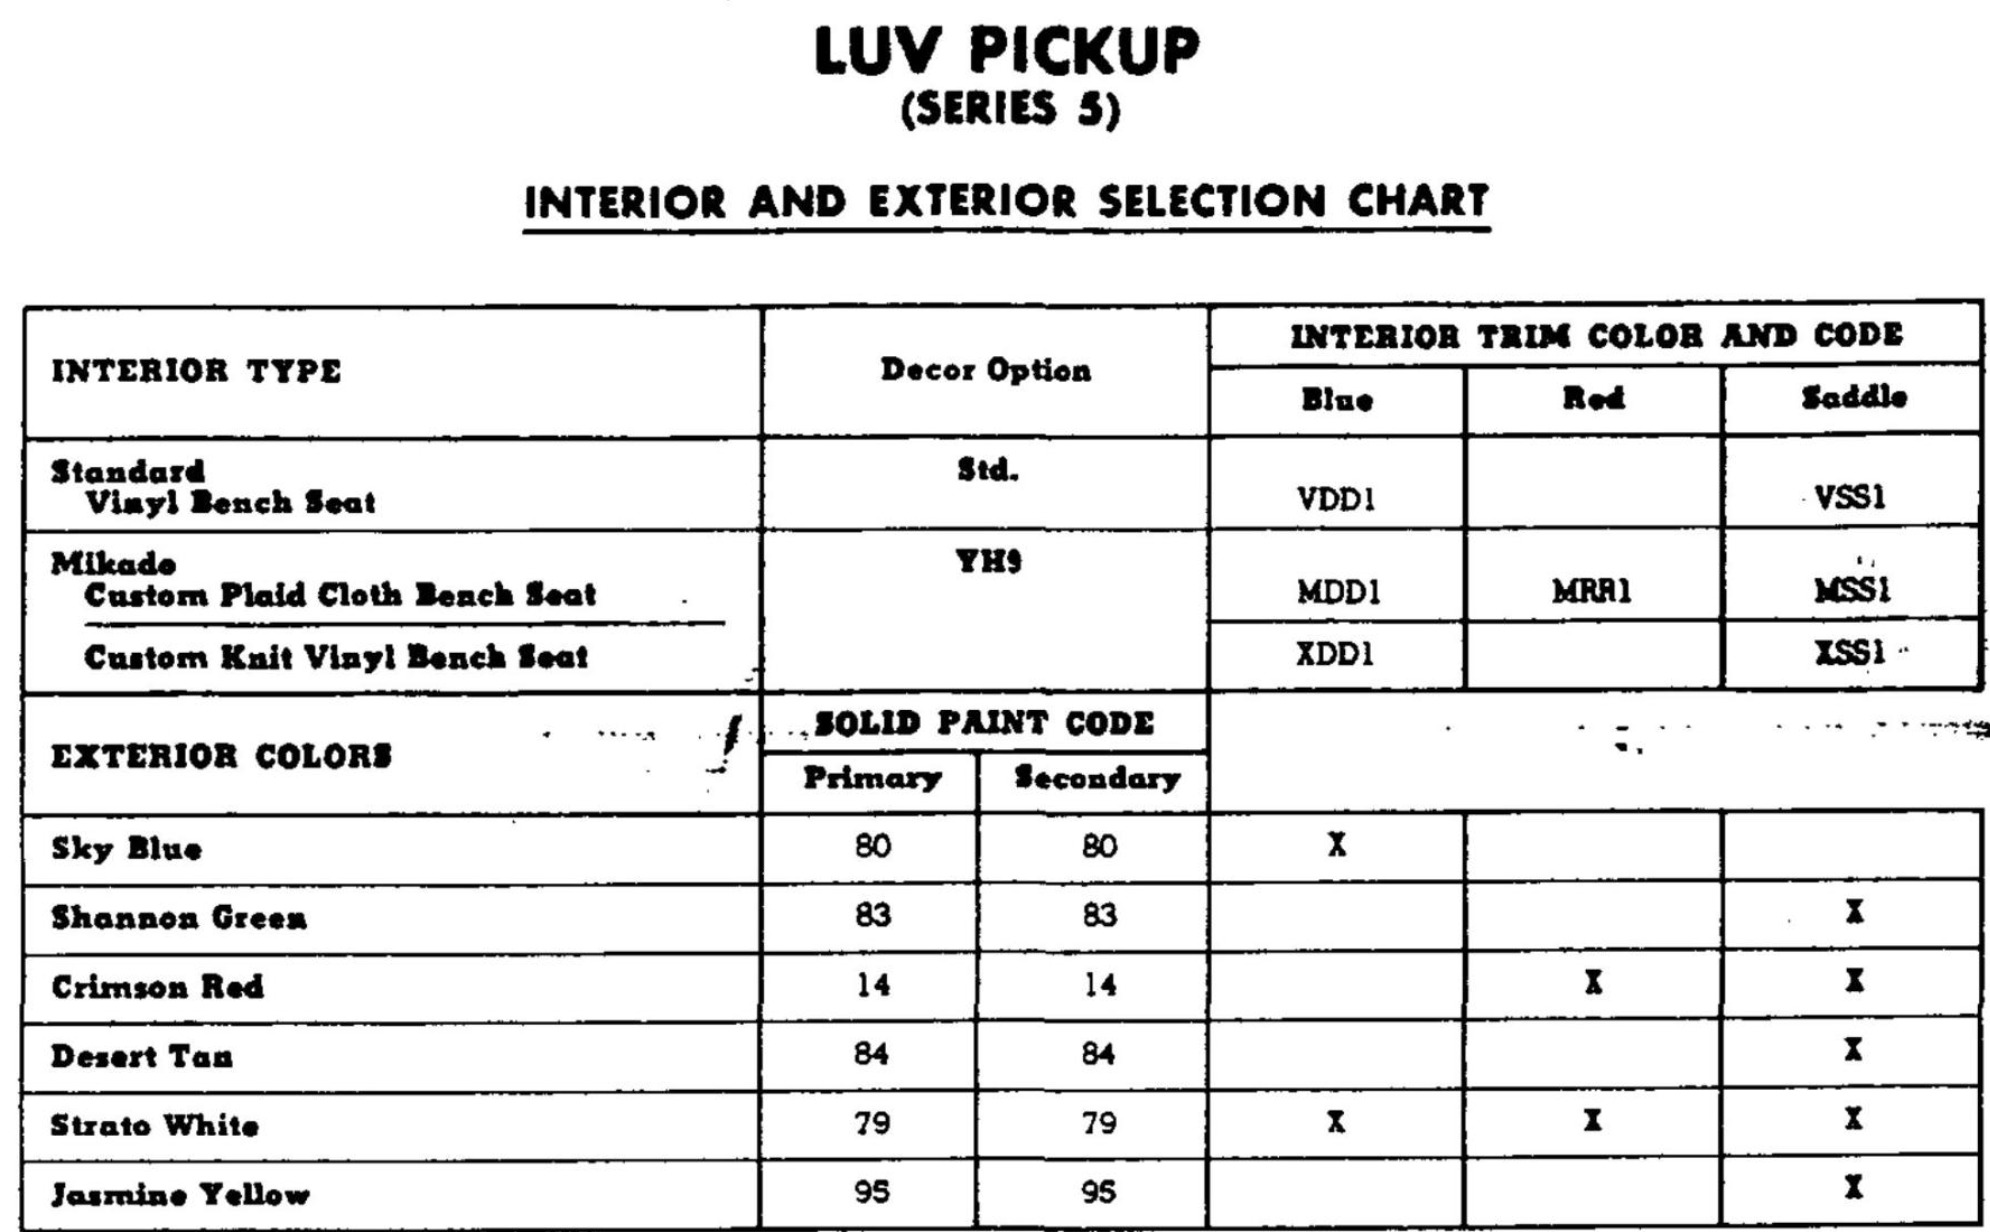 1976 Luv paint codes